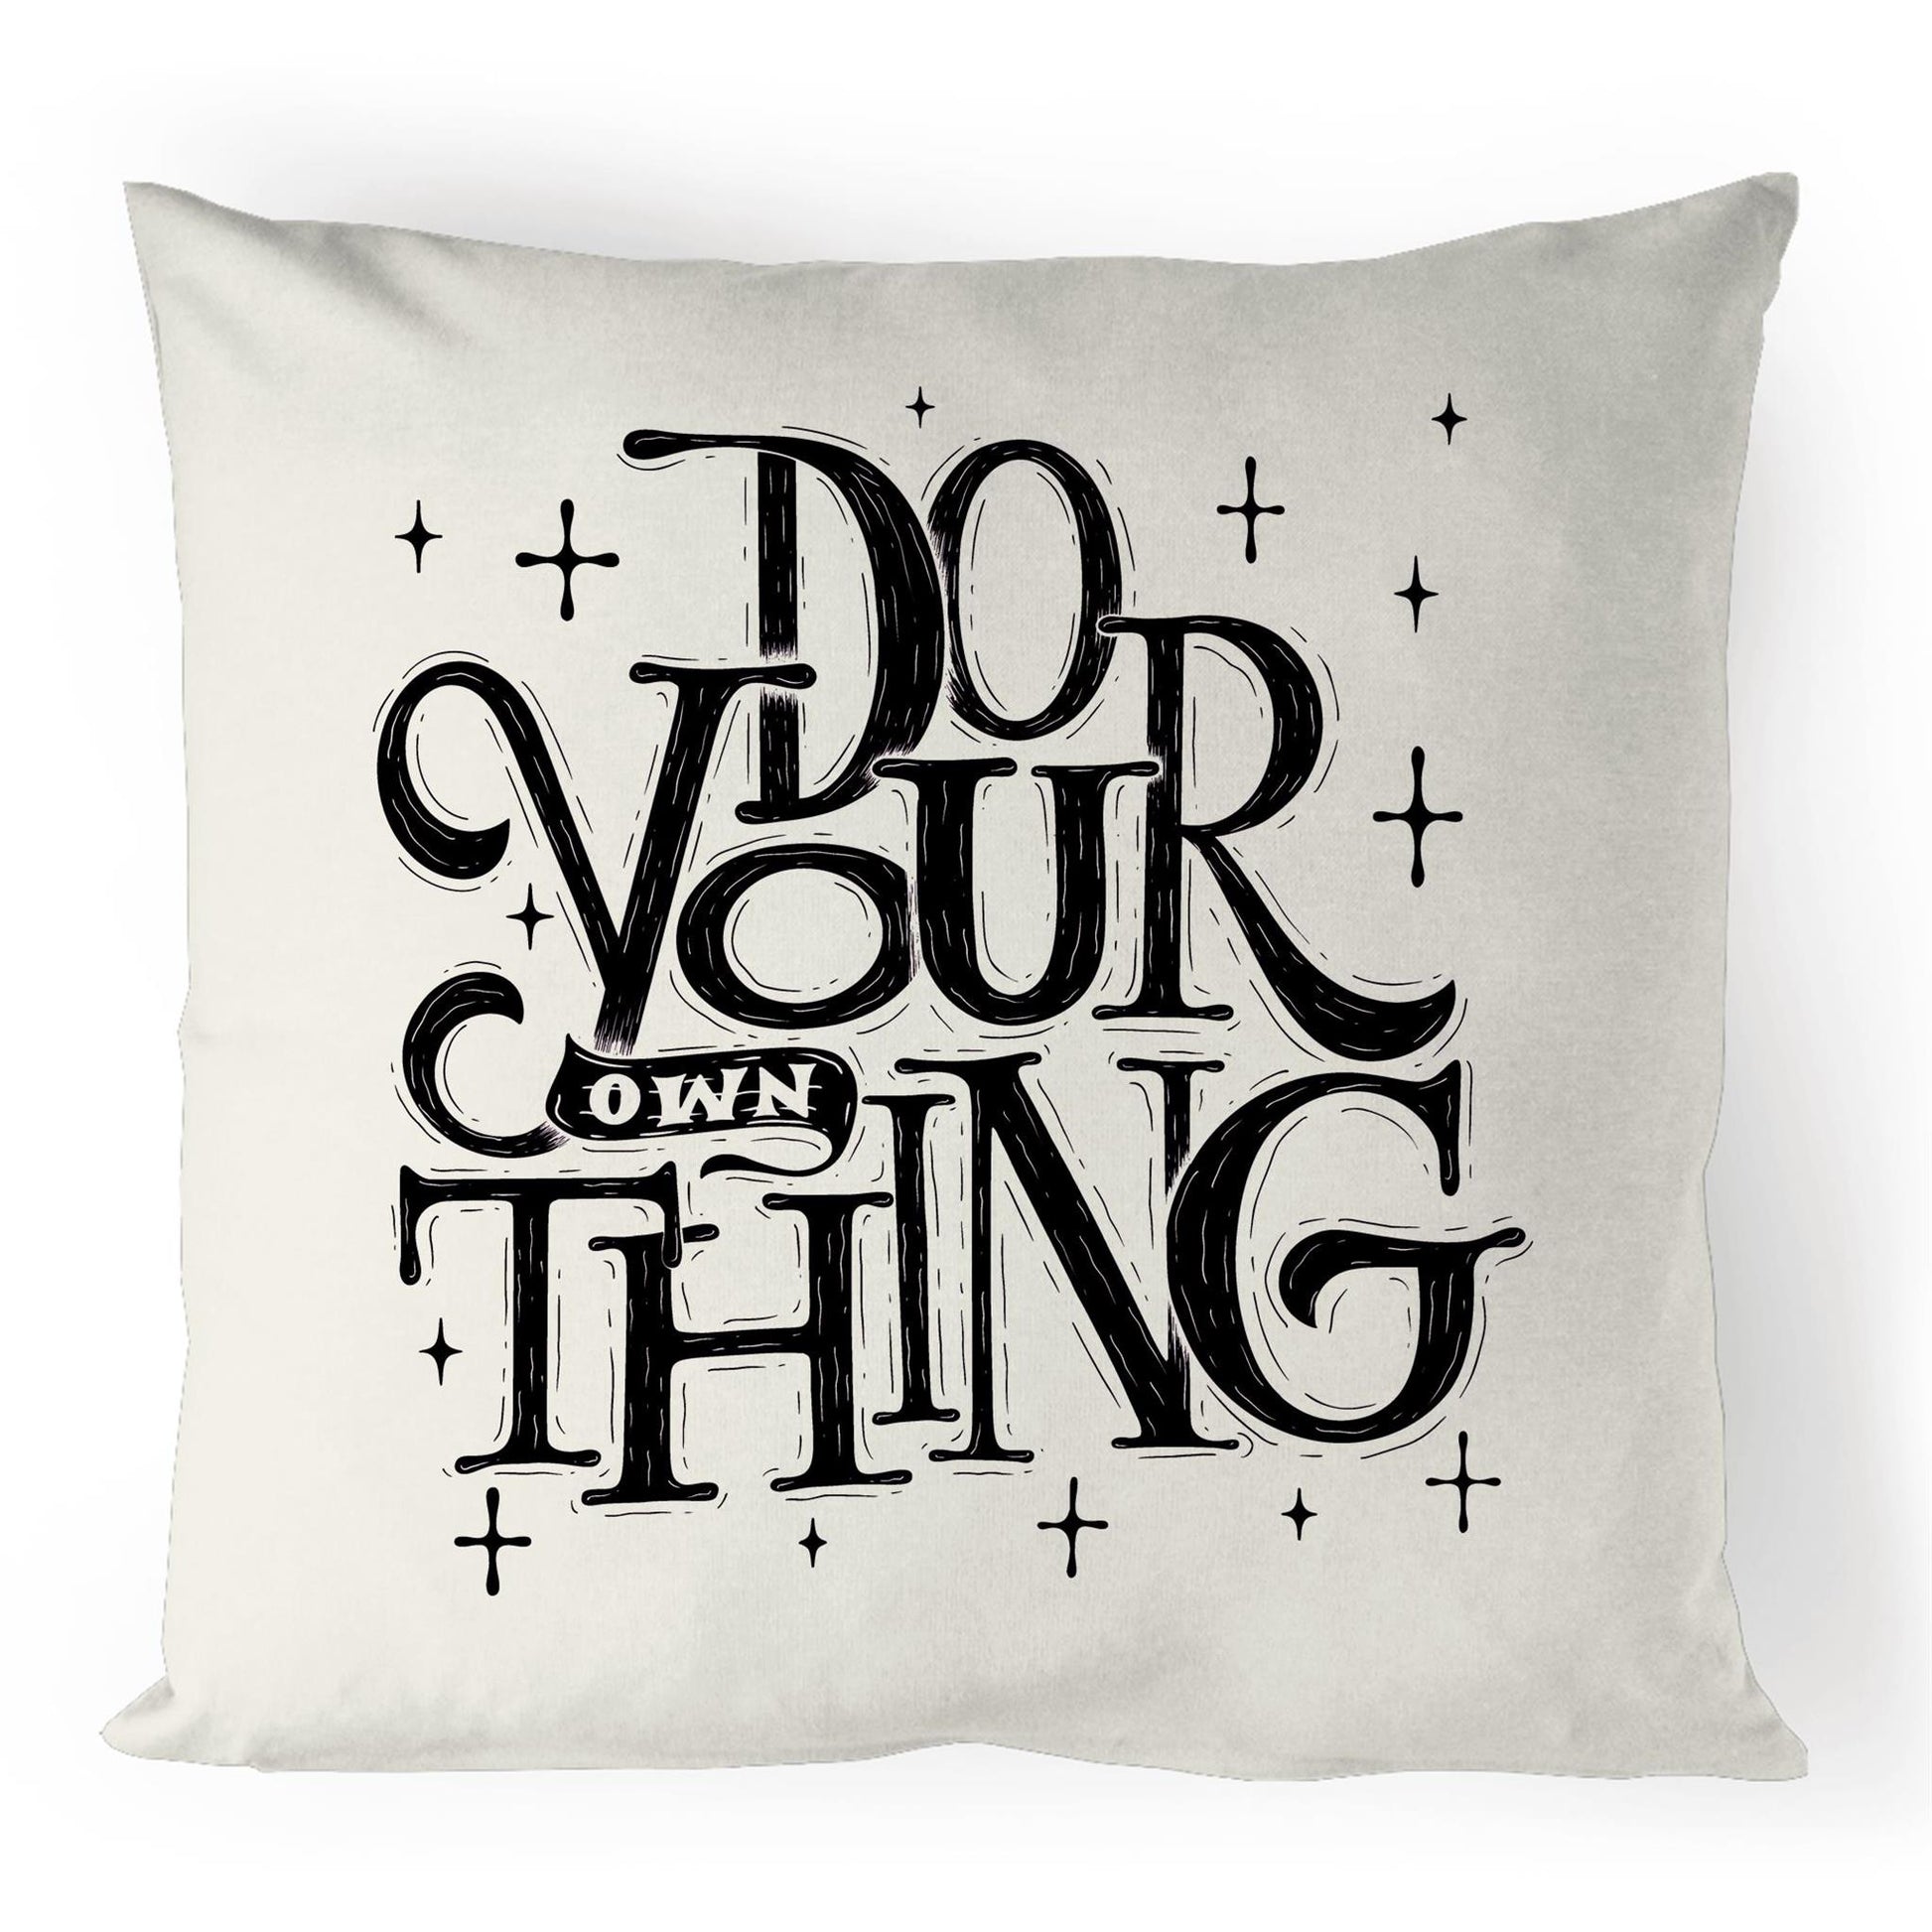 Do Your Own Thing - 100% Linen Cushion Cover Default Title Linen Cushion Cover